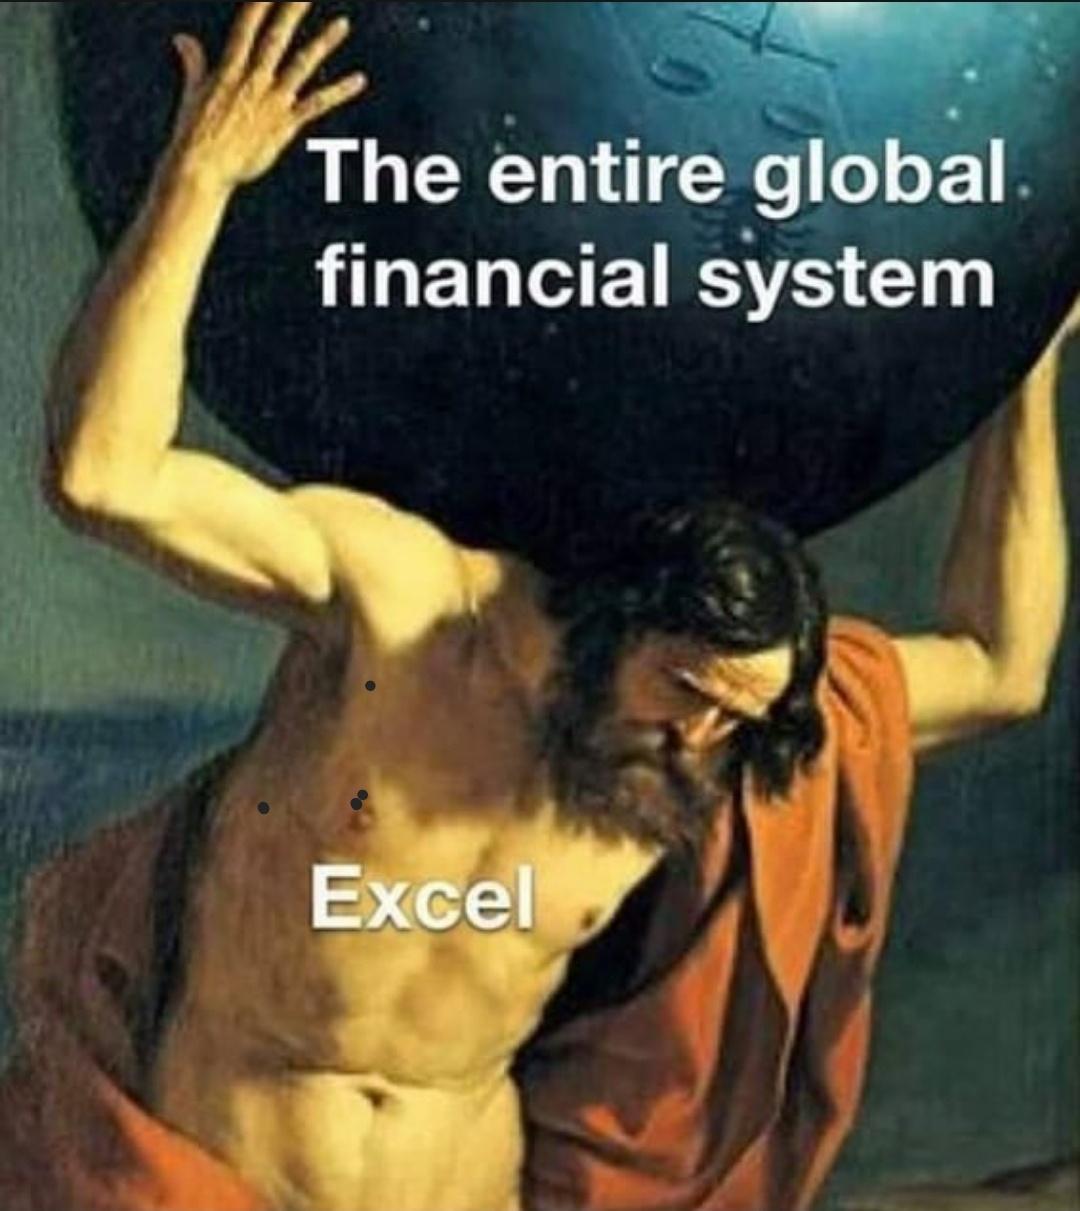 atlas guercino - The entire global financial system Excel